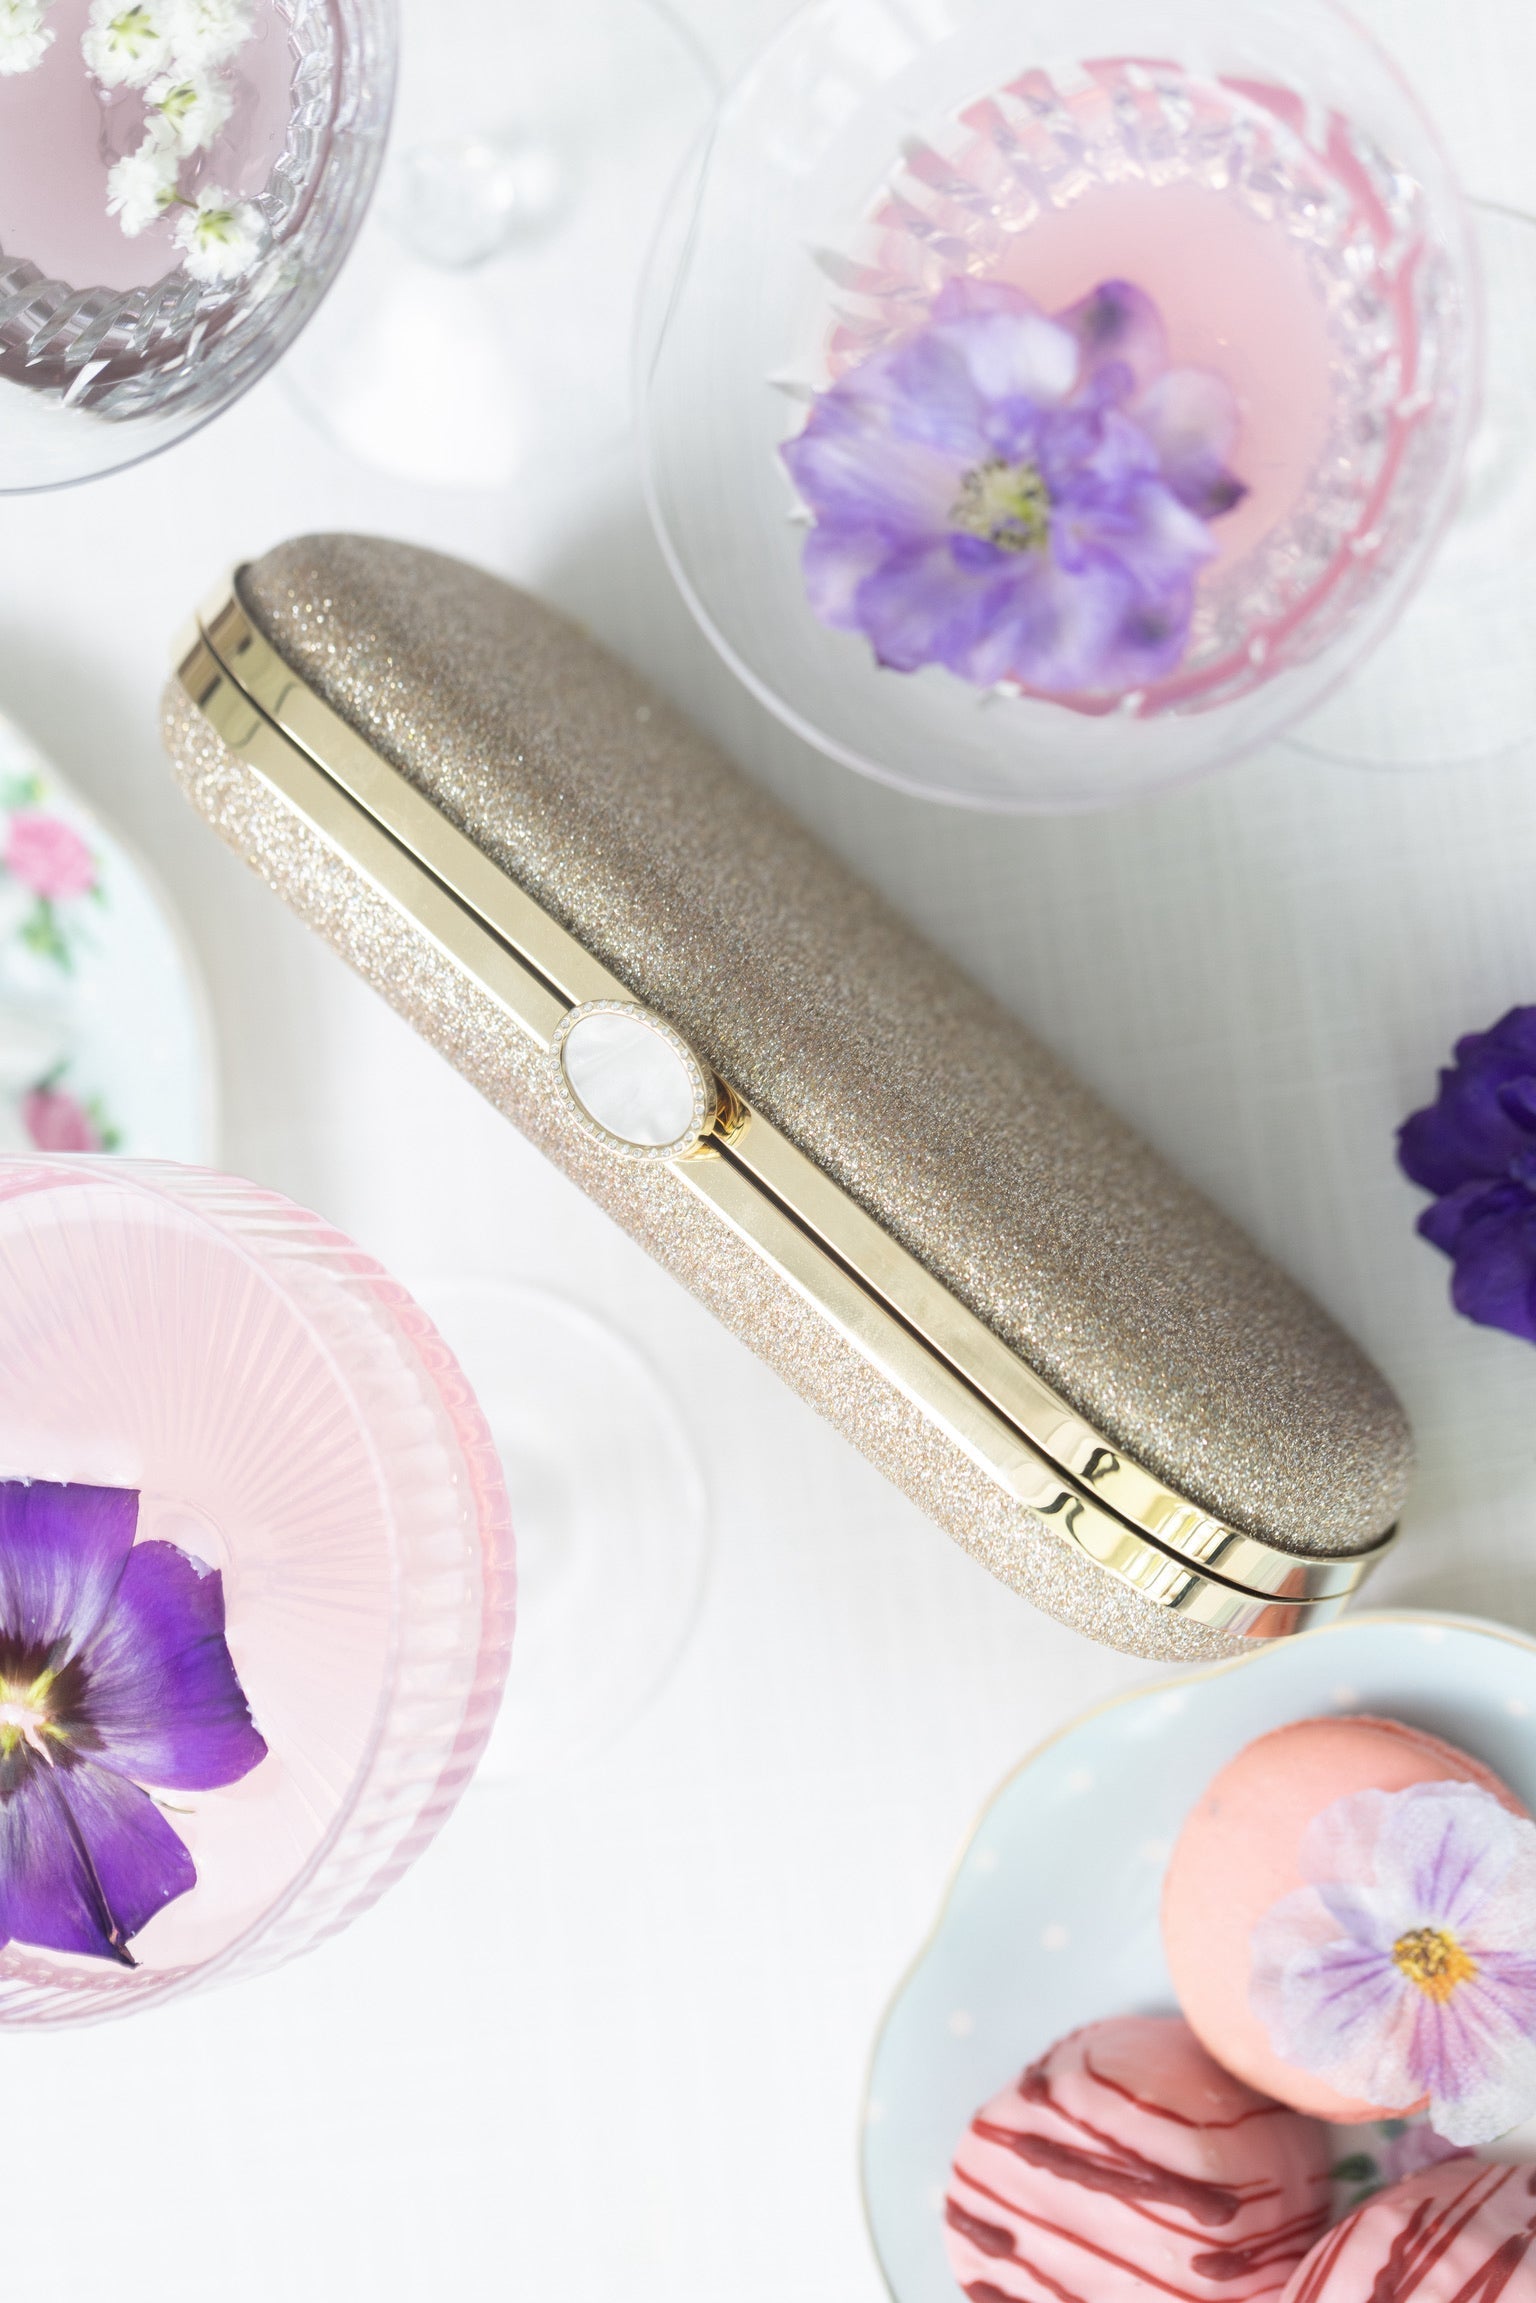 A gold clutch, flowers, and desserts on a table.